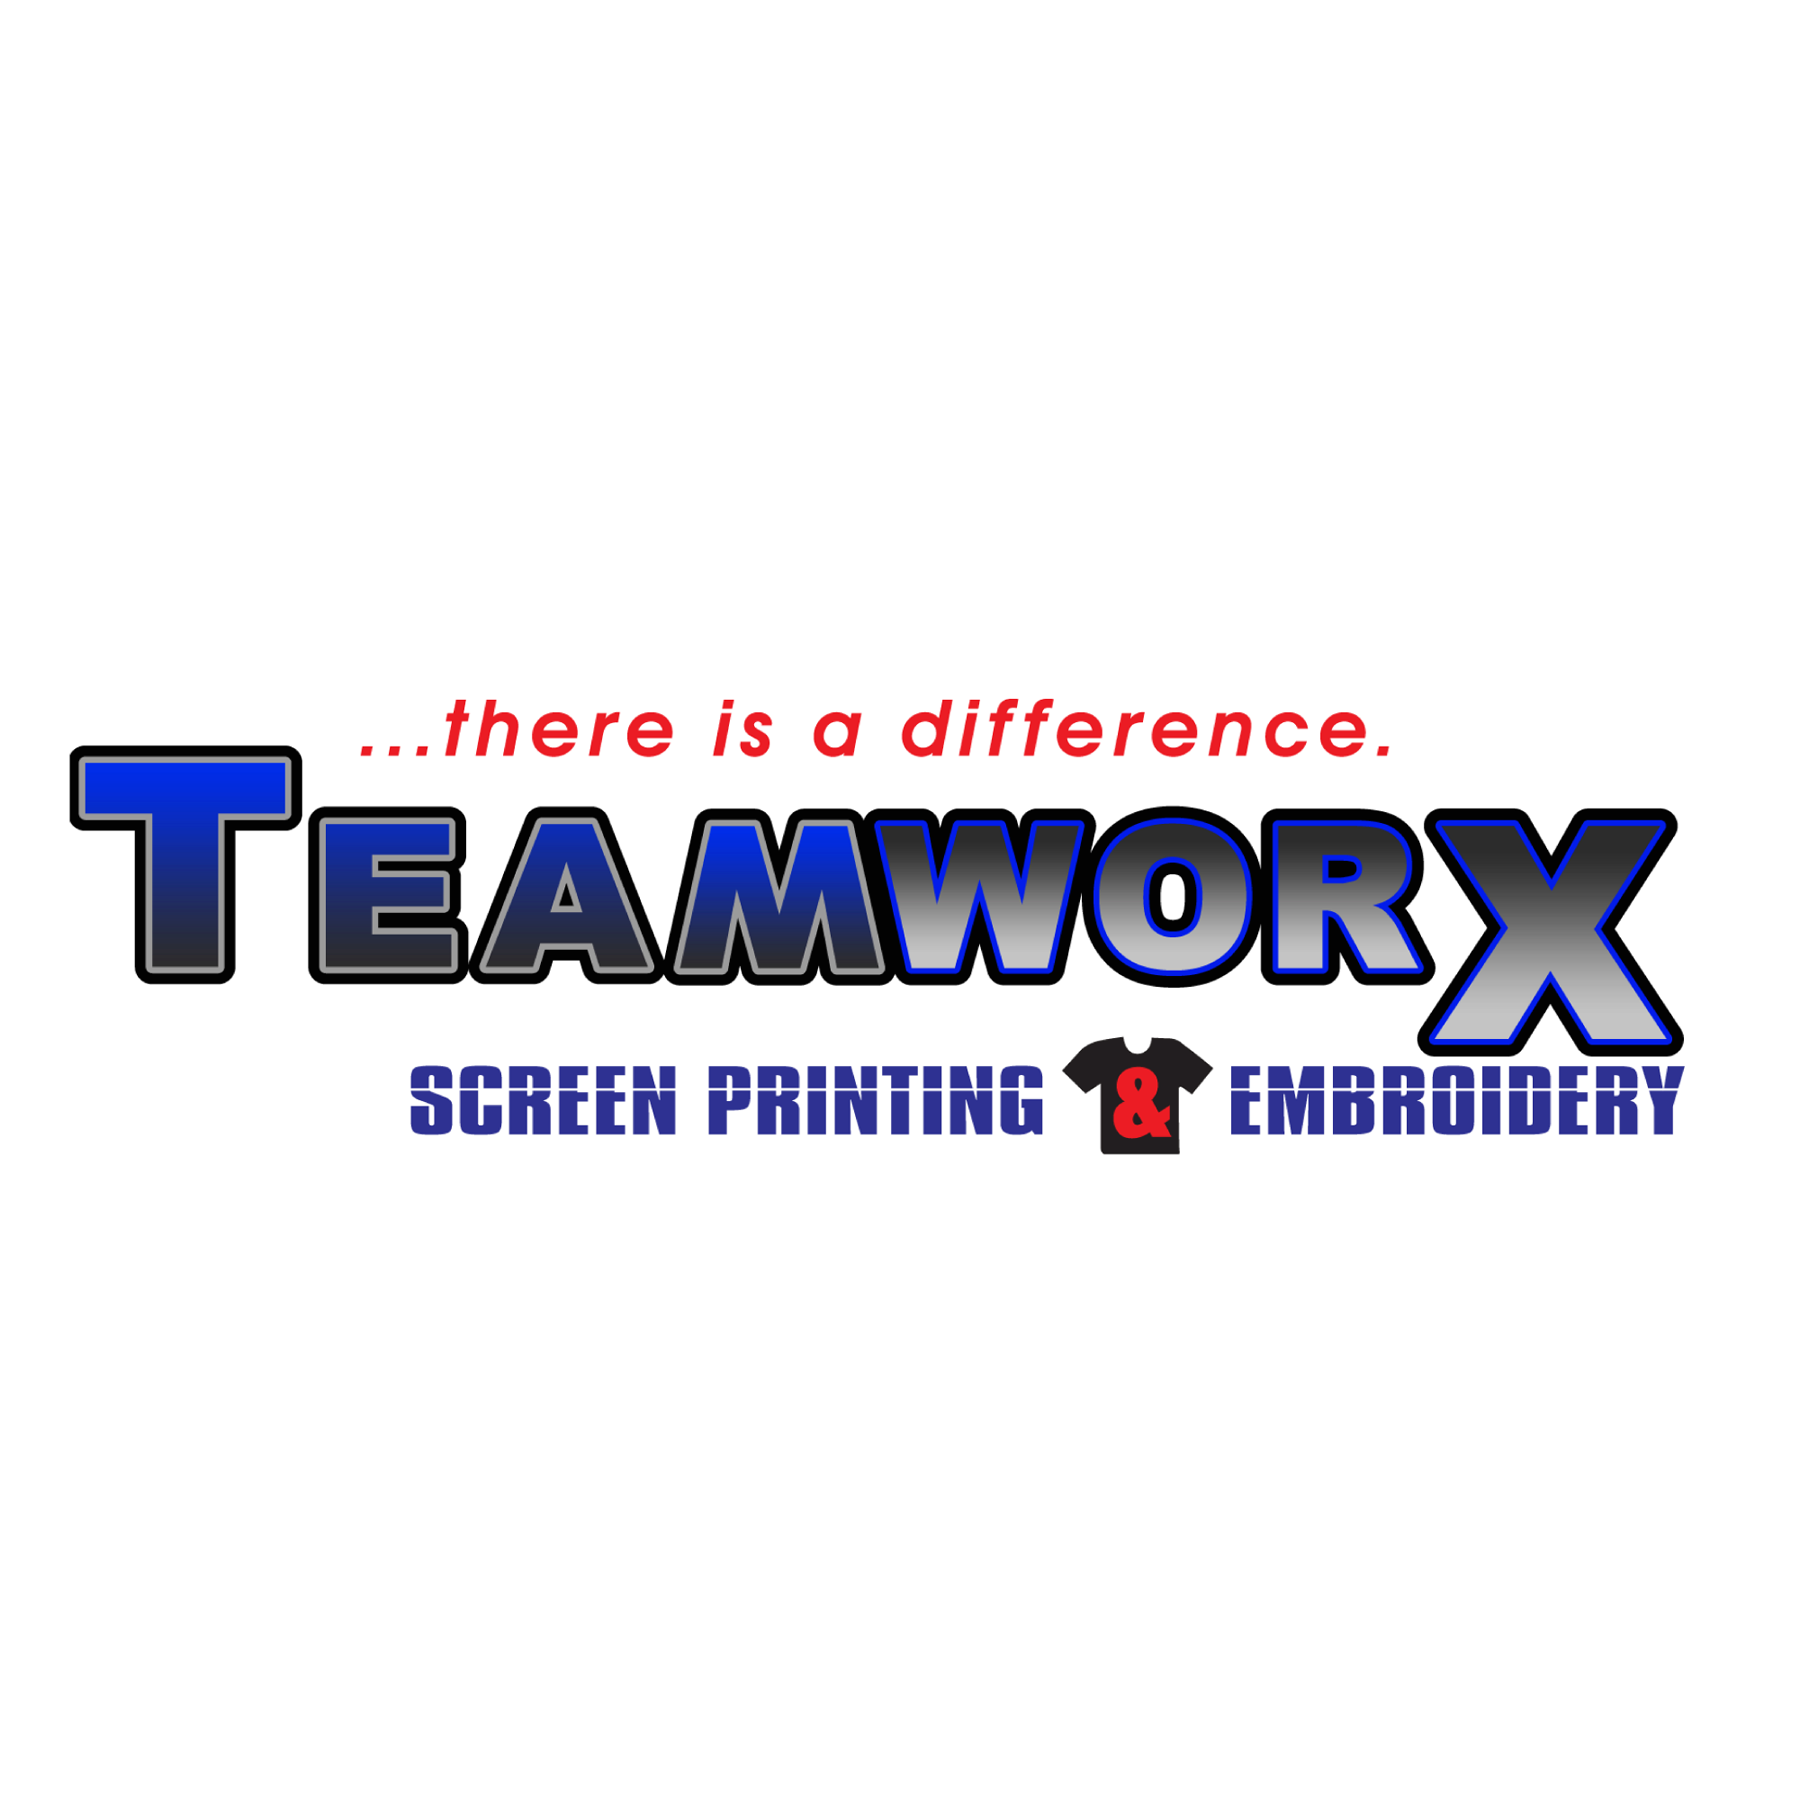 Teamworx Screen Printing & Embroidery Coupons near me in ...